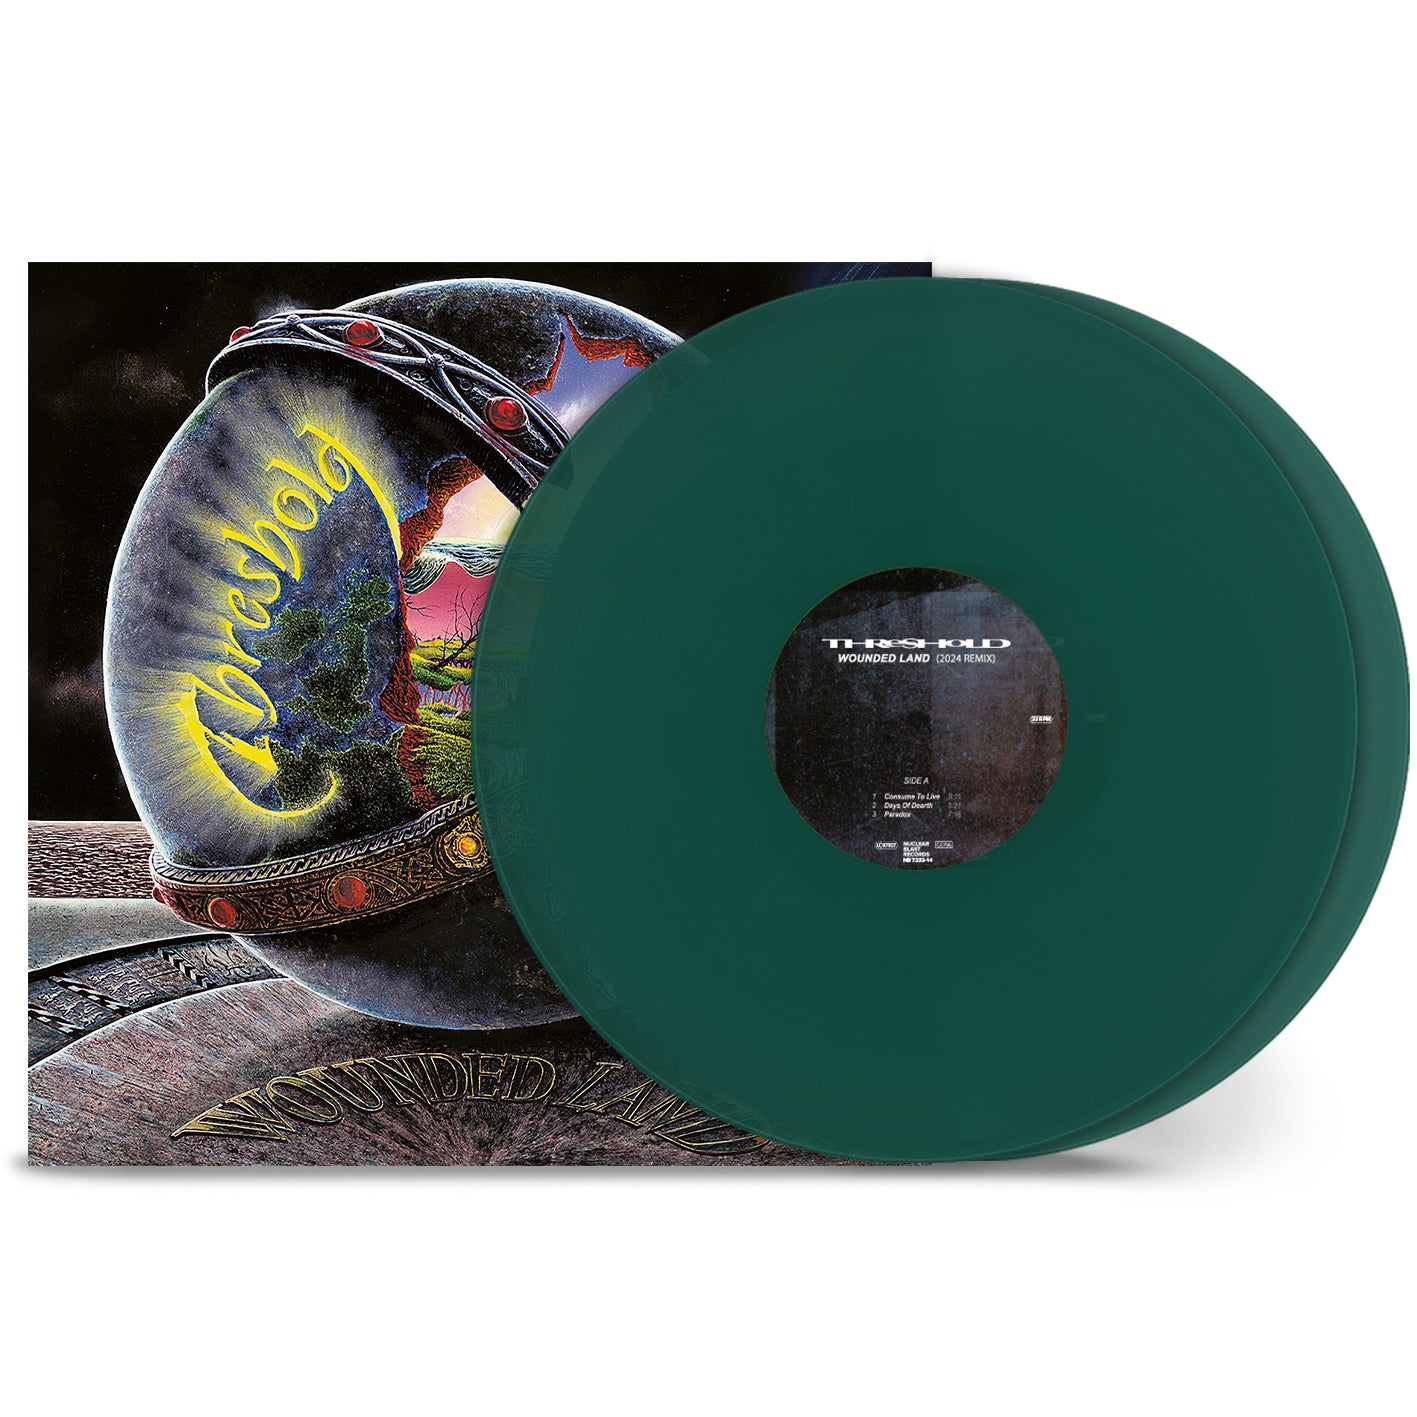 Threshold "Wounded Land (Remixed & Remastered)" 2x12" Transparent Green Vinyl - PRE-ORDER